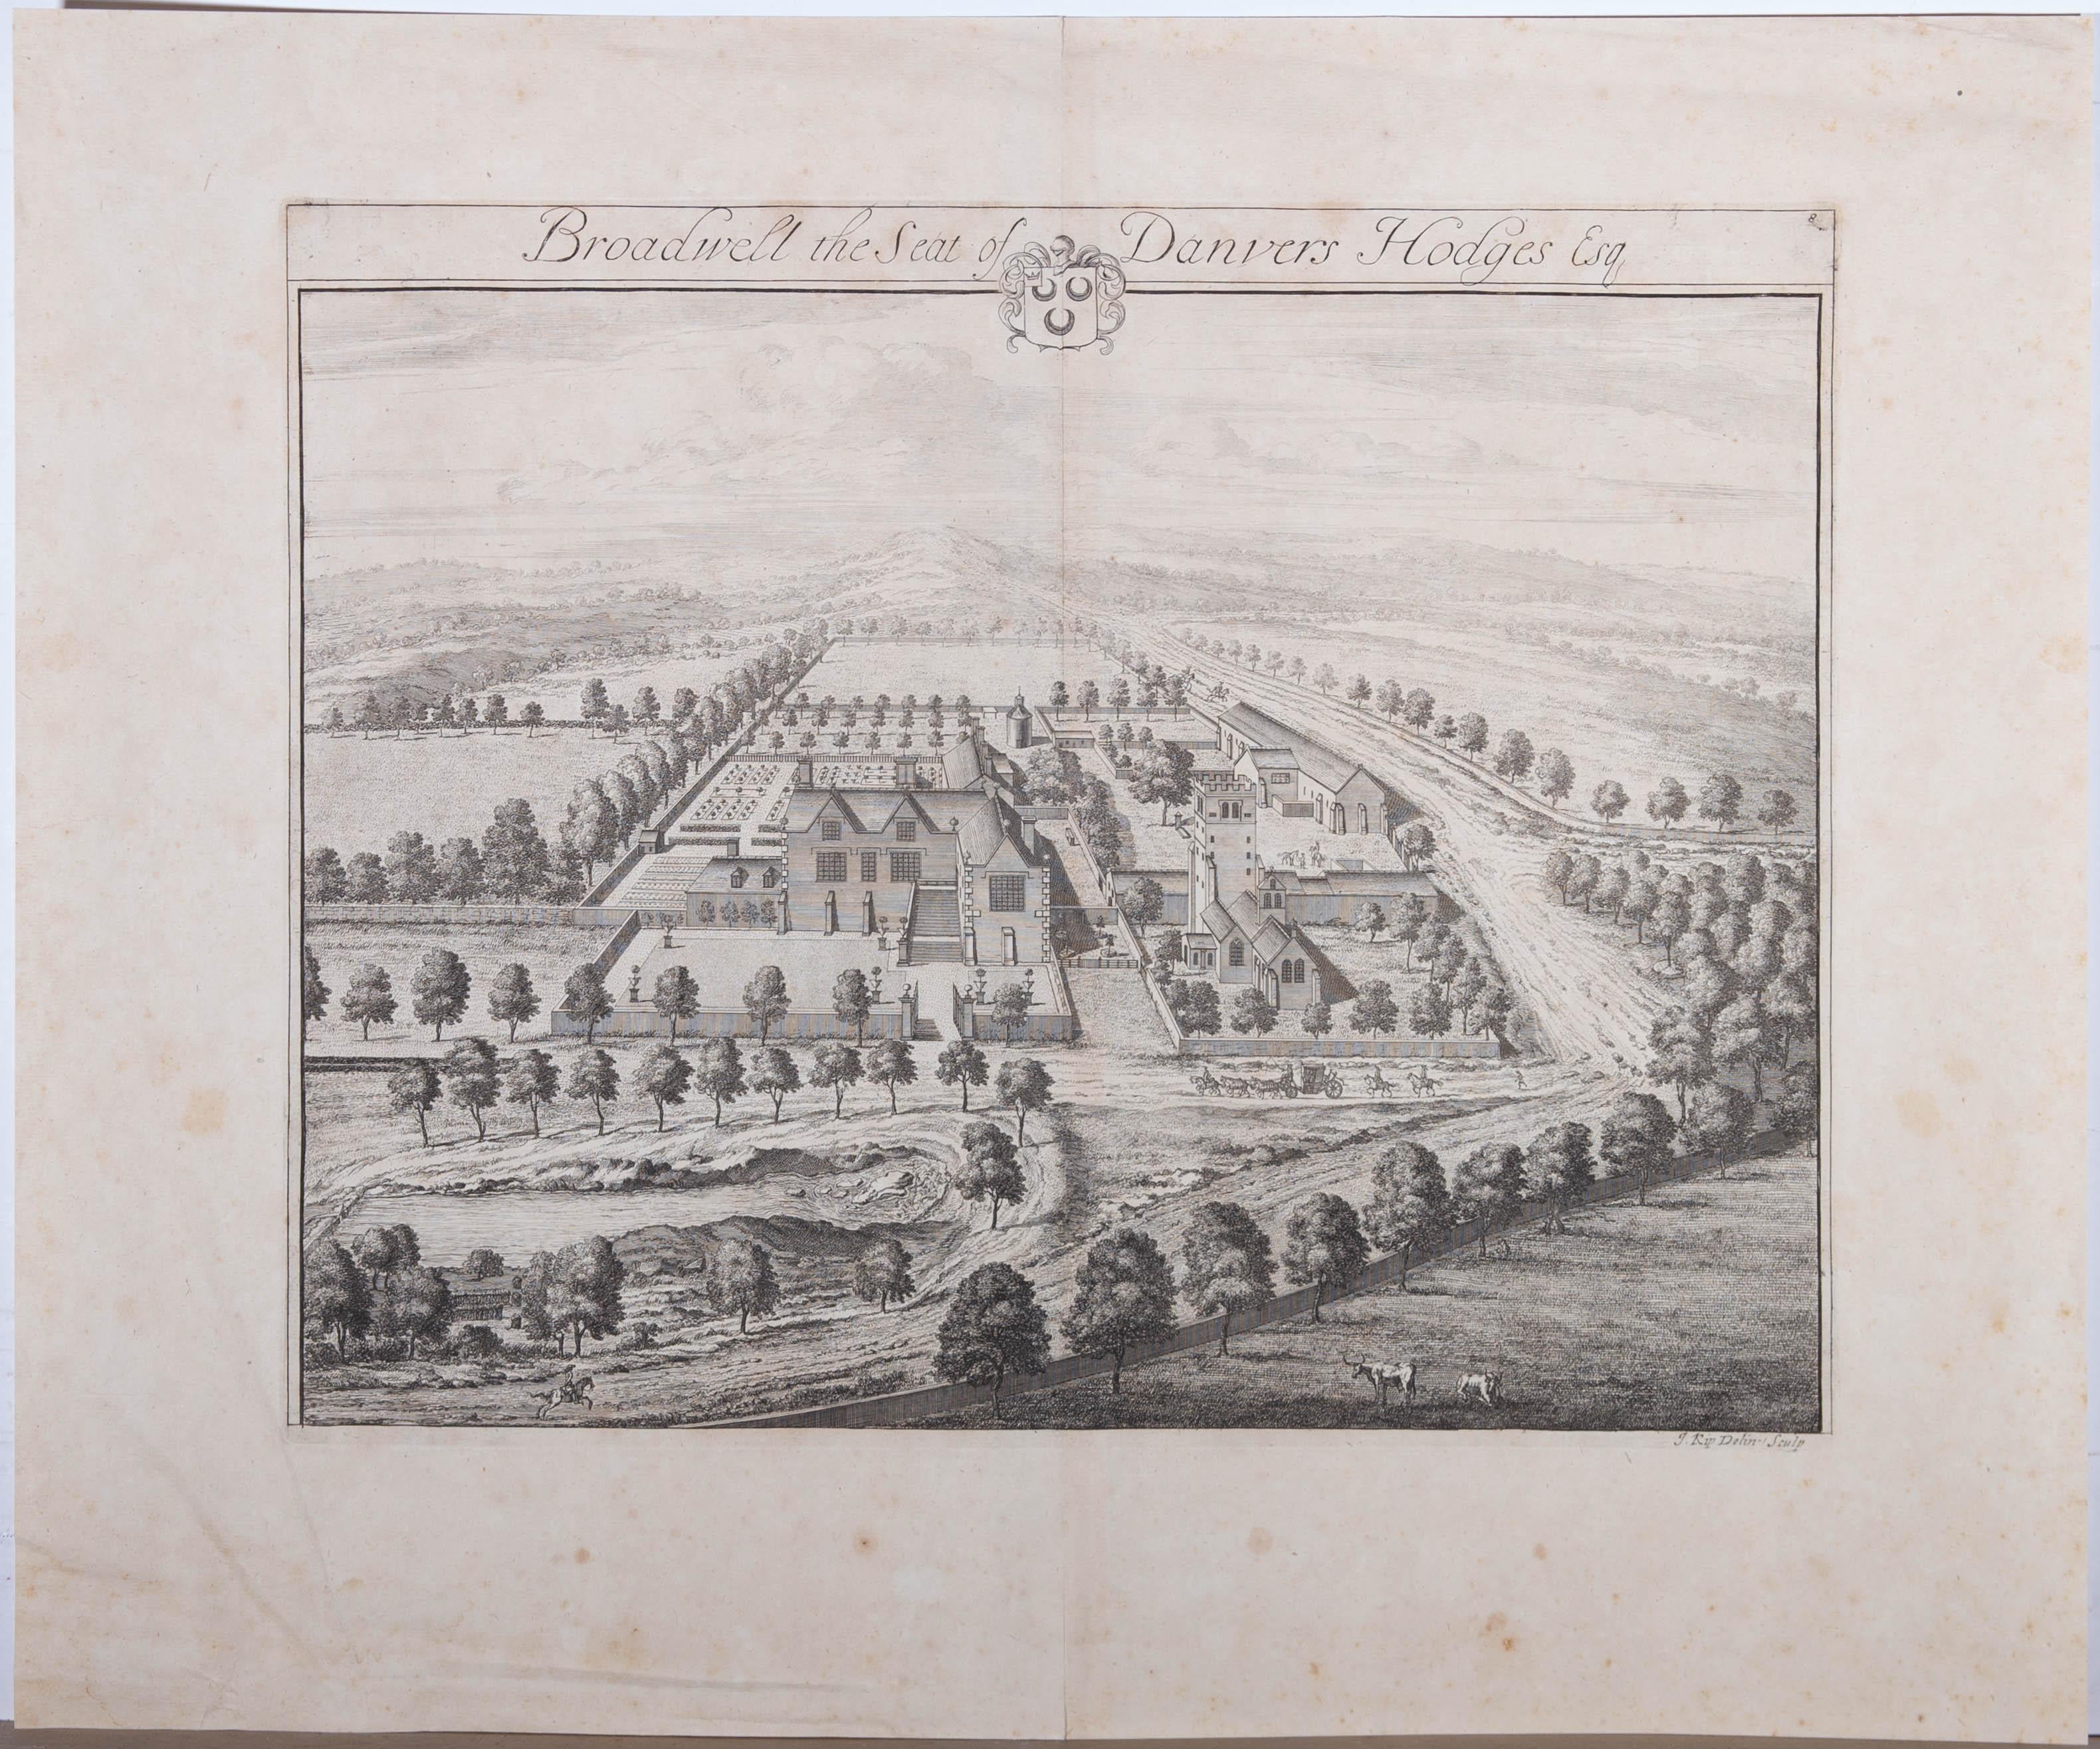 A topographical engraving of Broadwell in Gloucestershire by Johannes 'Jan' Kip (c.1652-1722). From 'The Ancient and Present State of Gloucestershire 'by Sir Robert Atkyns, published in 1712 and reprinted in 1768. Numbered 8 in plate to the